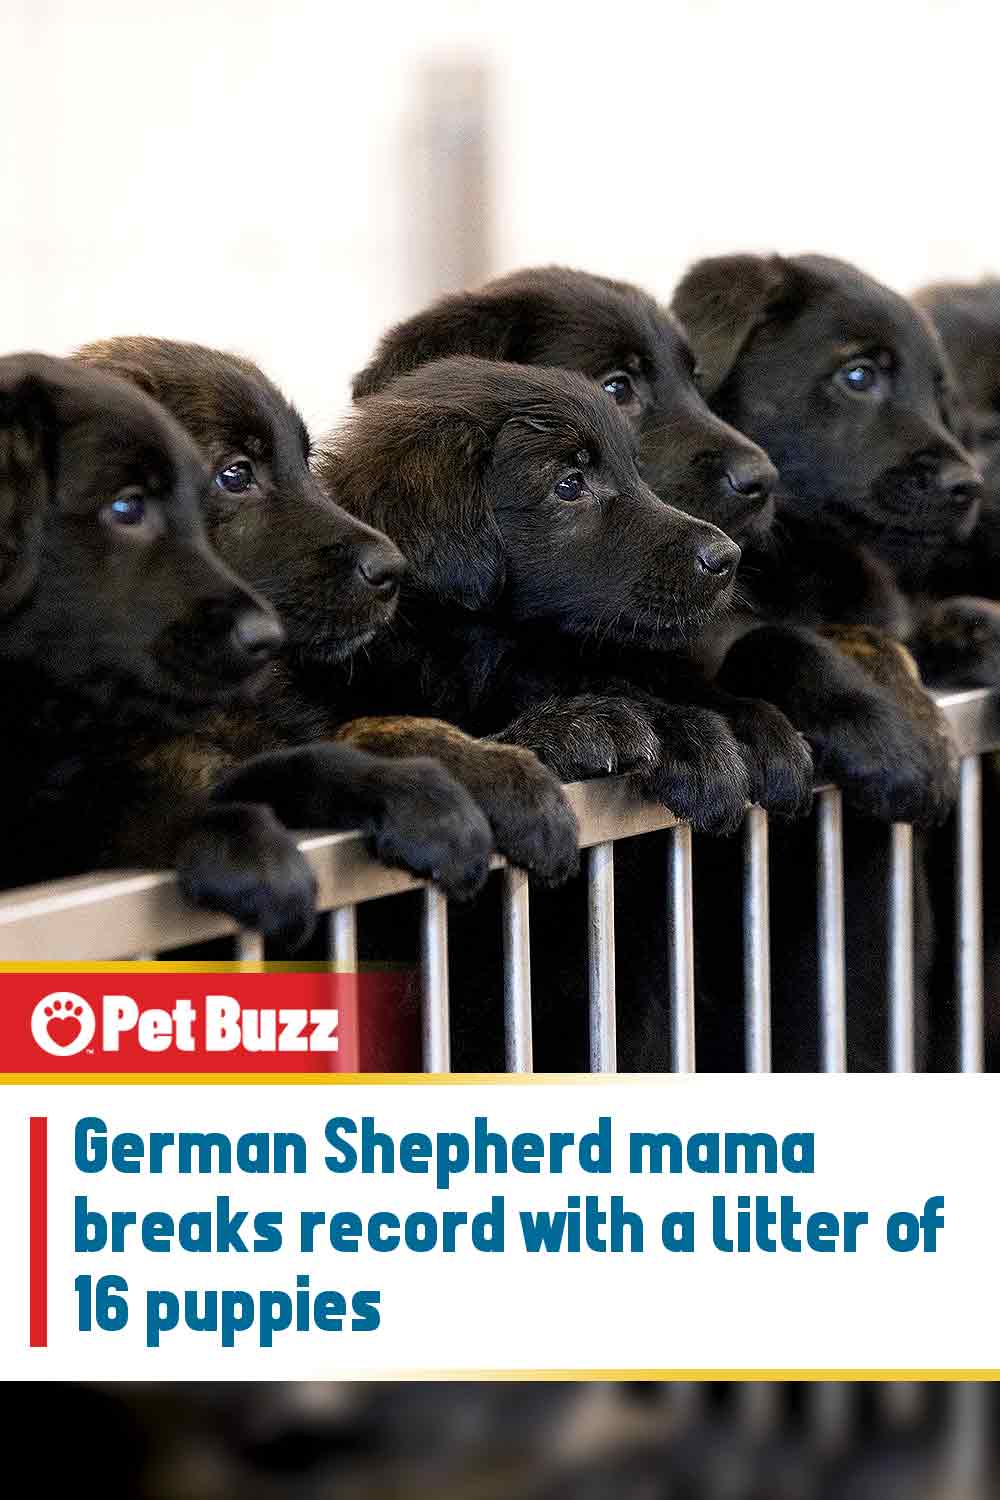 German Shepherd mama breaks record with a litter of 16 puppies